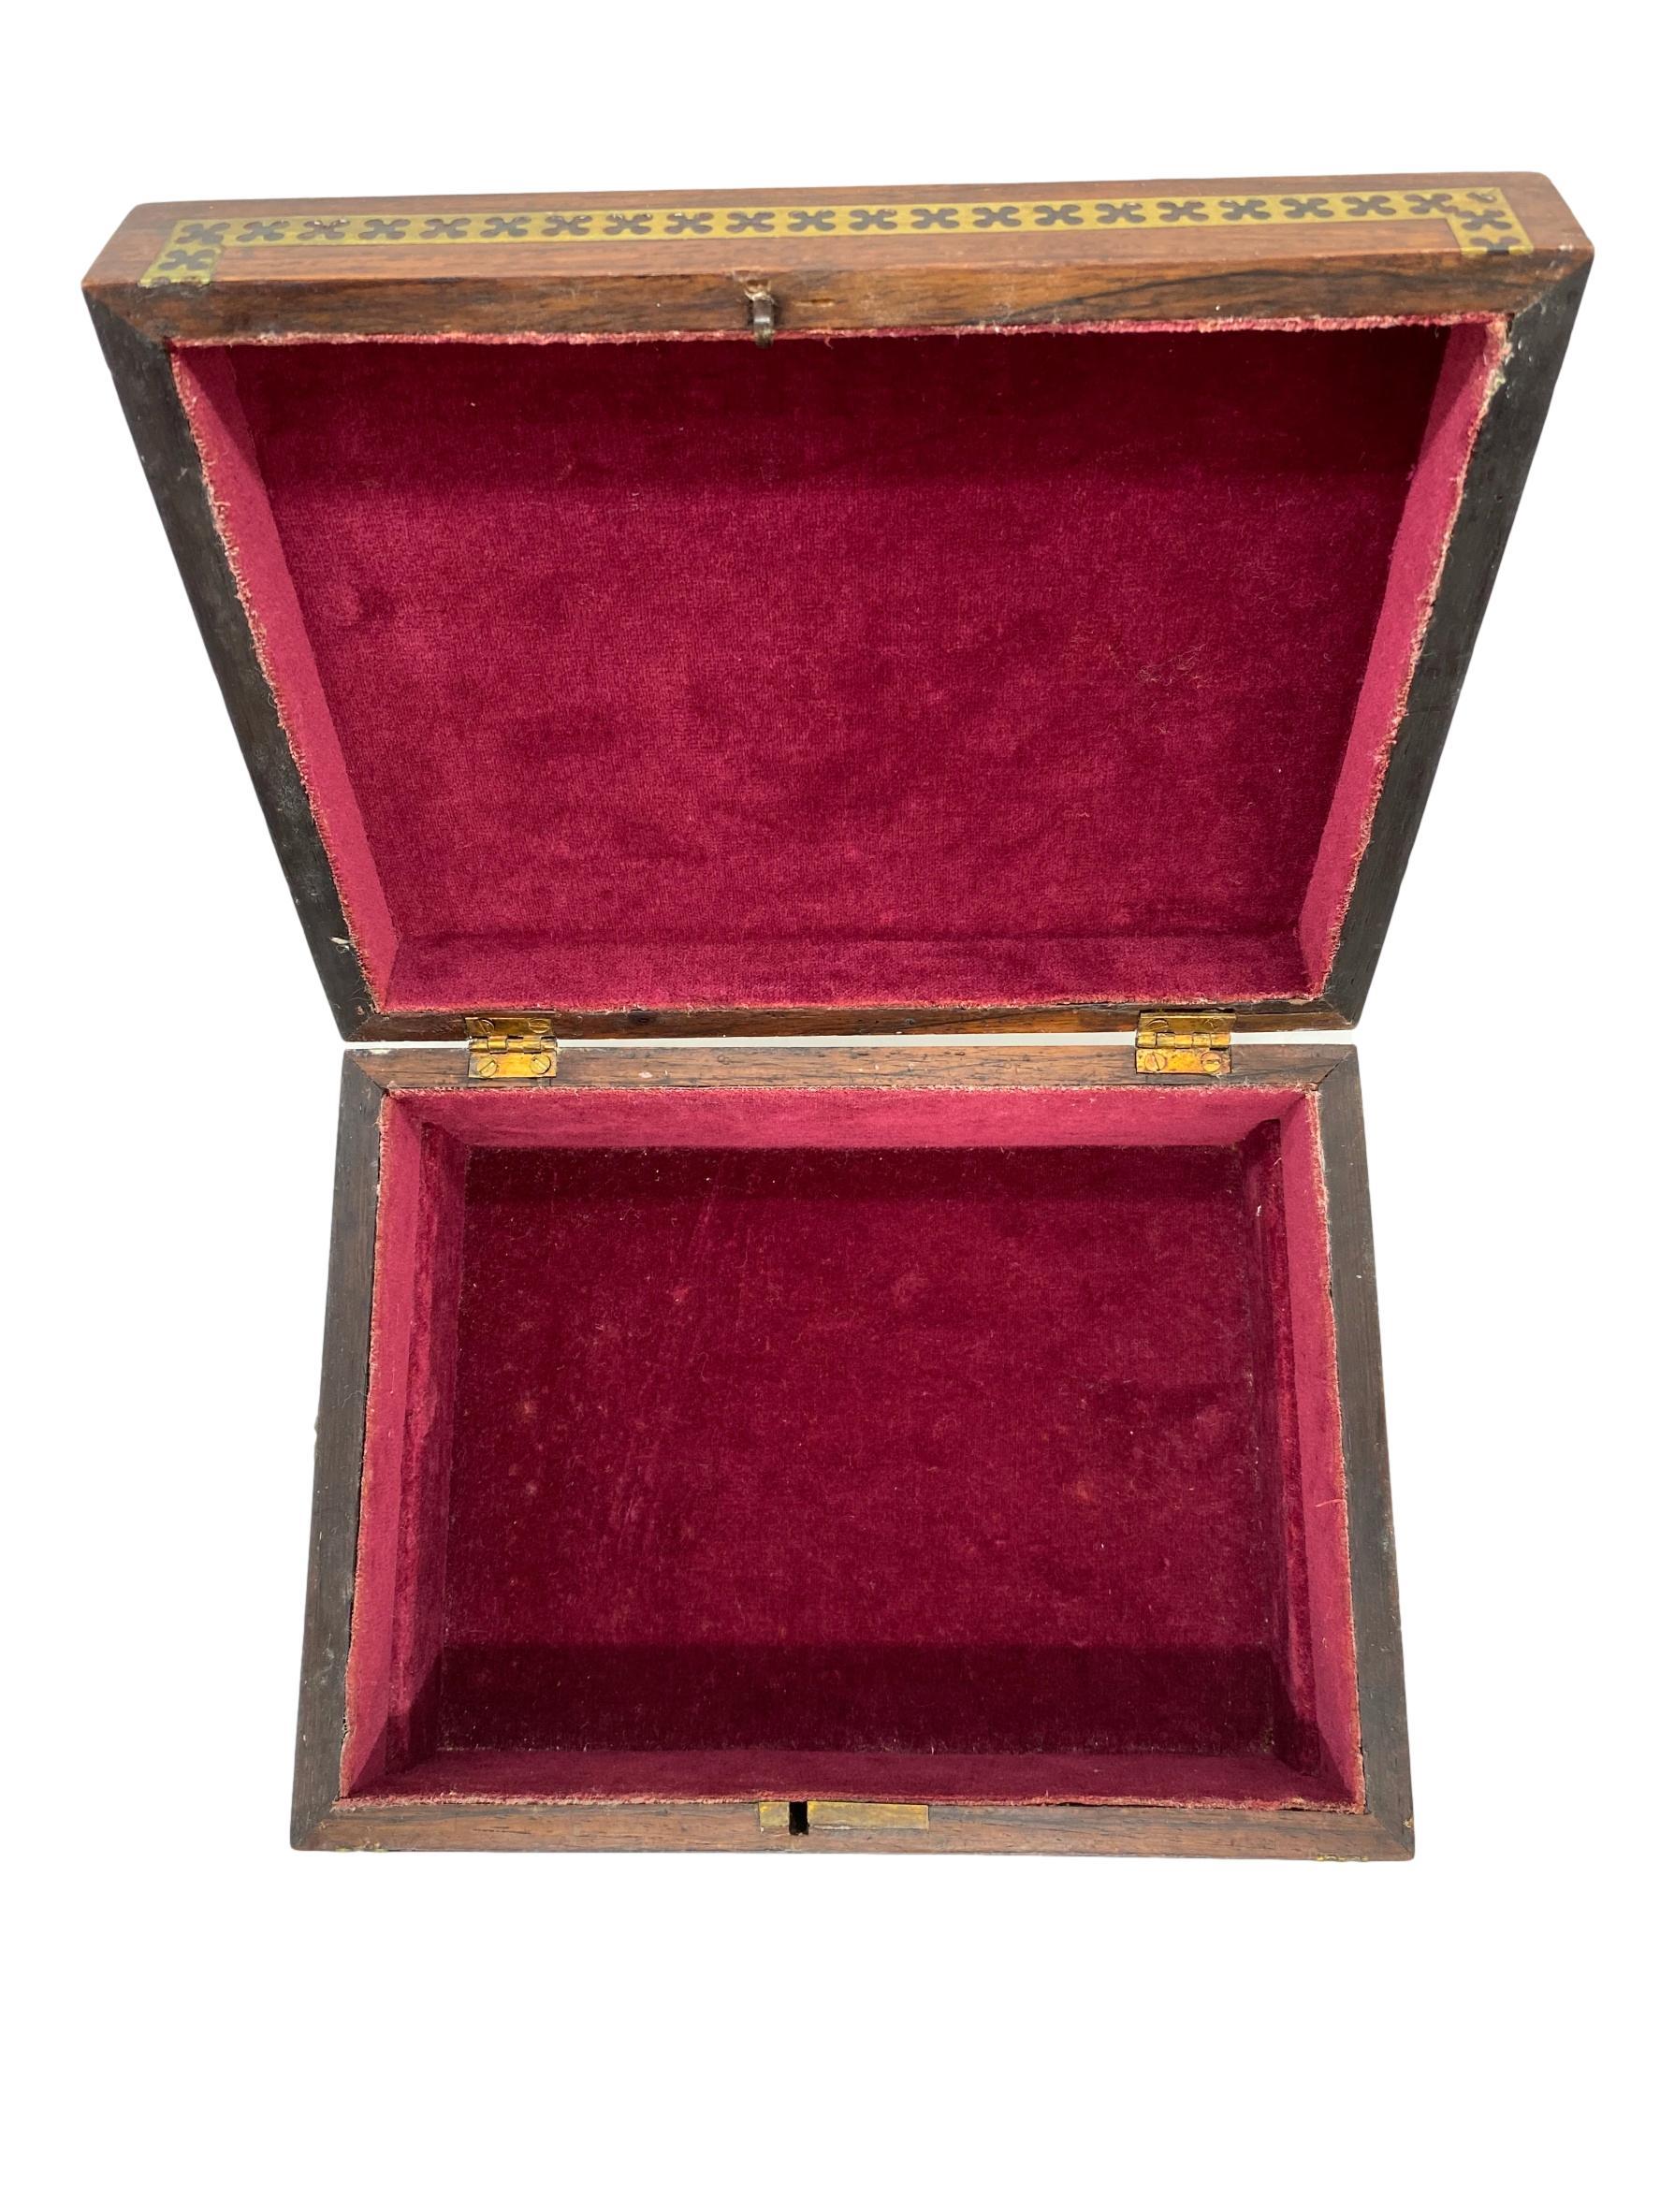 Antique Regency Box in Rosewood with Inlaid Ebony and Brass, English, circa 1820 For Sale 4